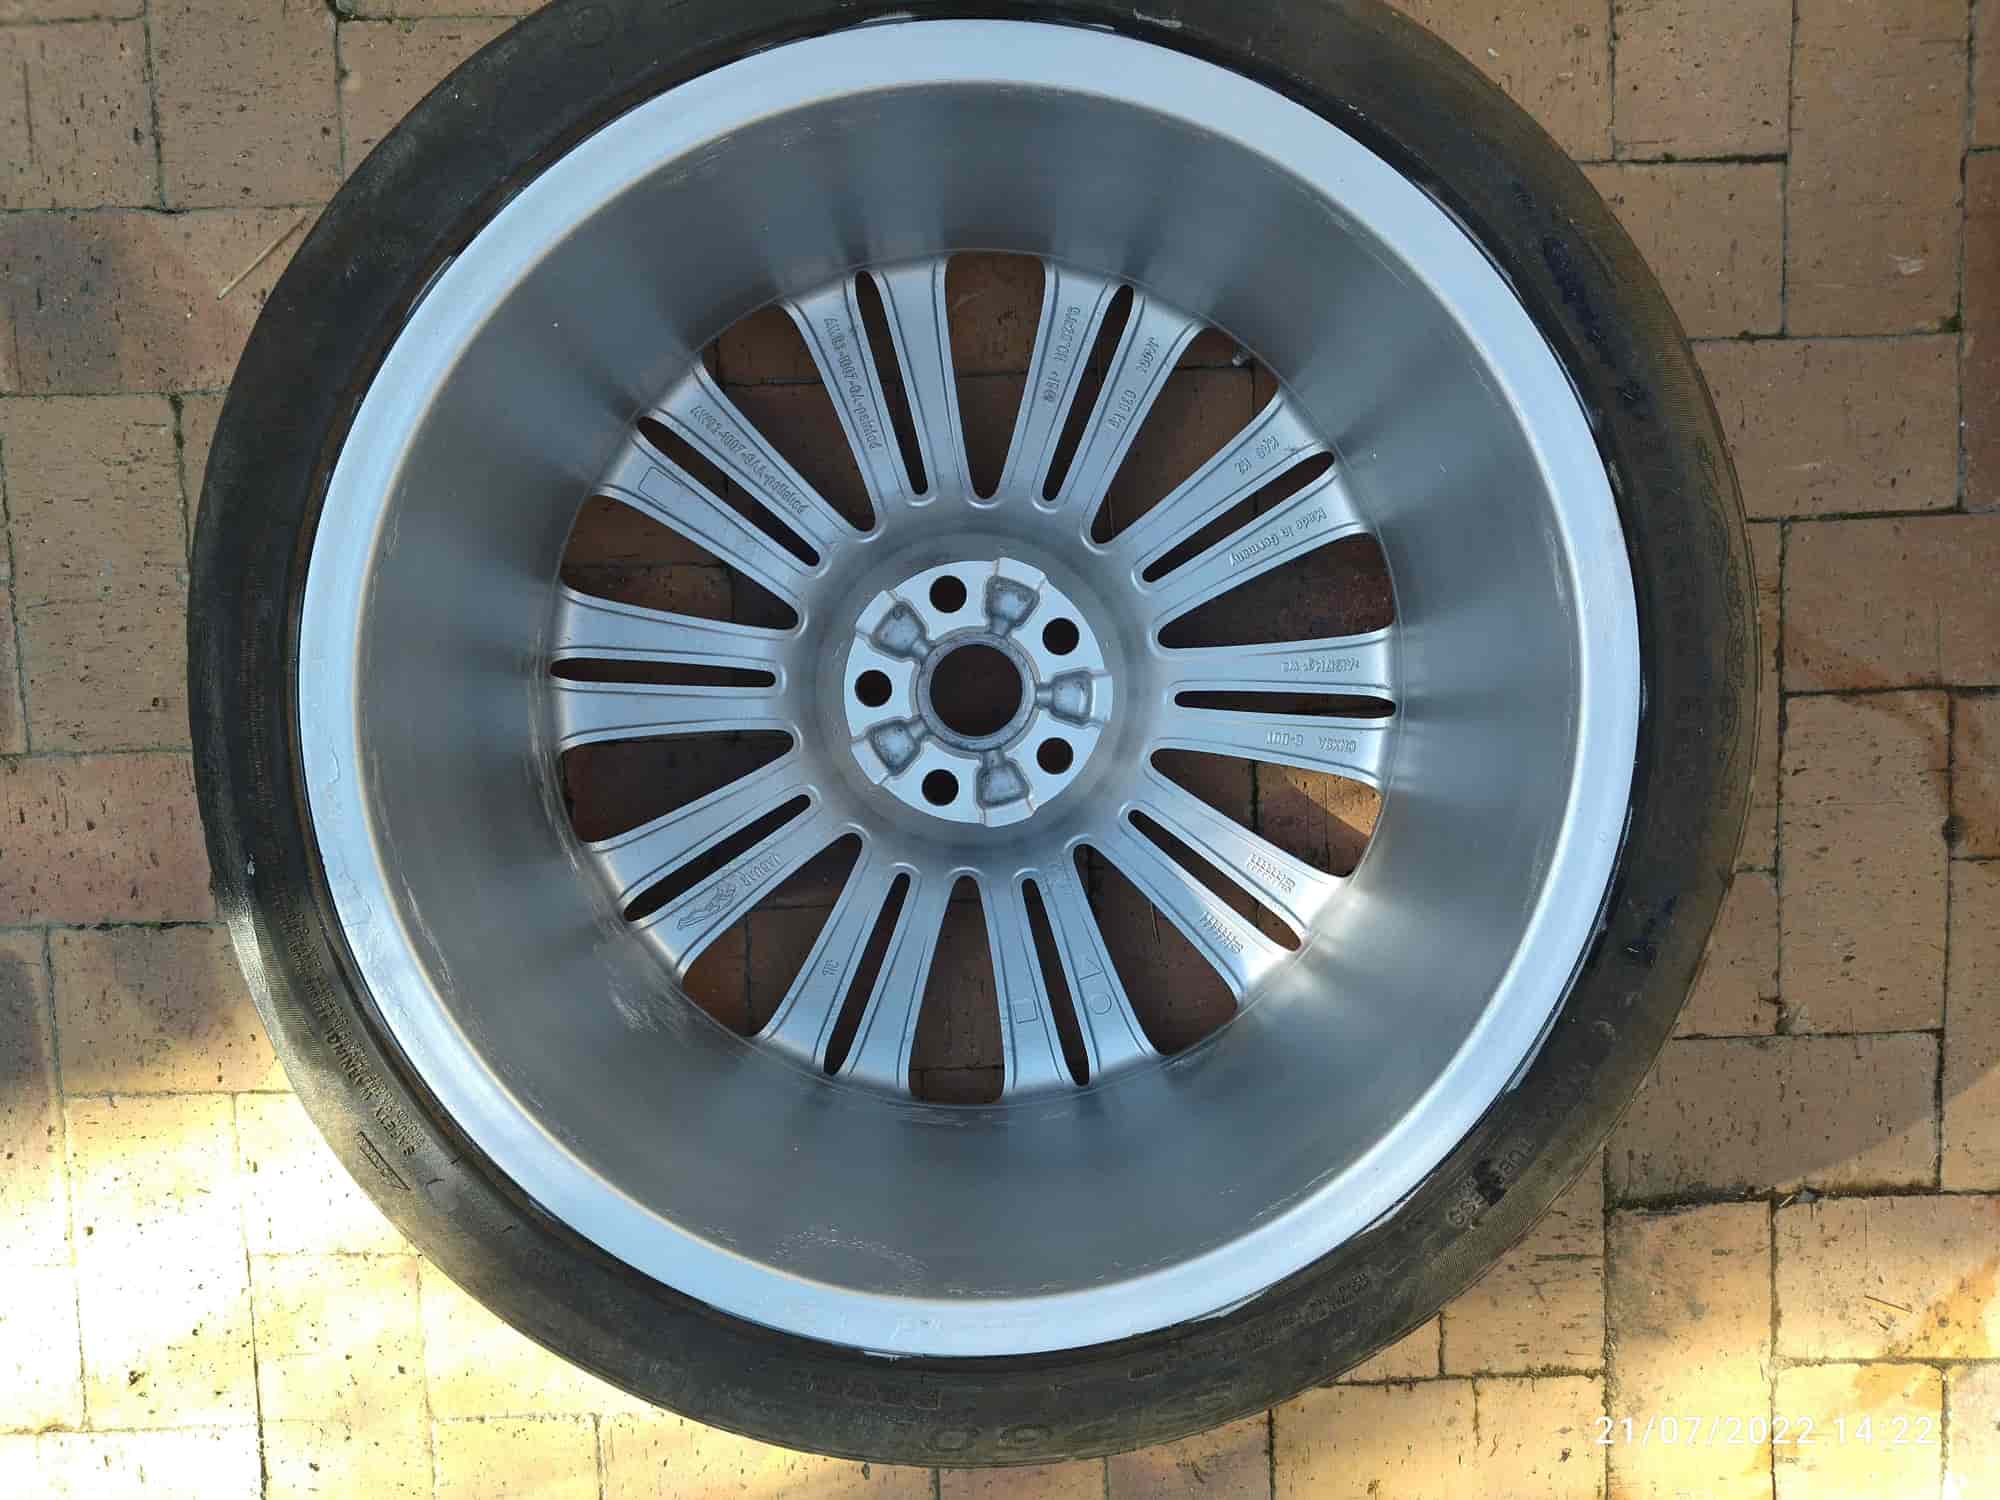 Wheels and Tires/Axles - Jaguar XJ 20" Rims X351 - Used - 2009 to 2014 Jaguar XJ - Cape Town, South Africa